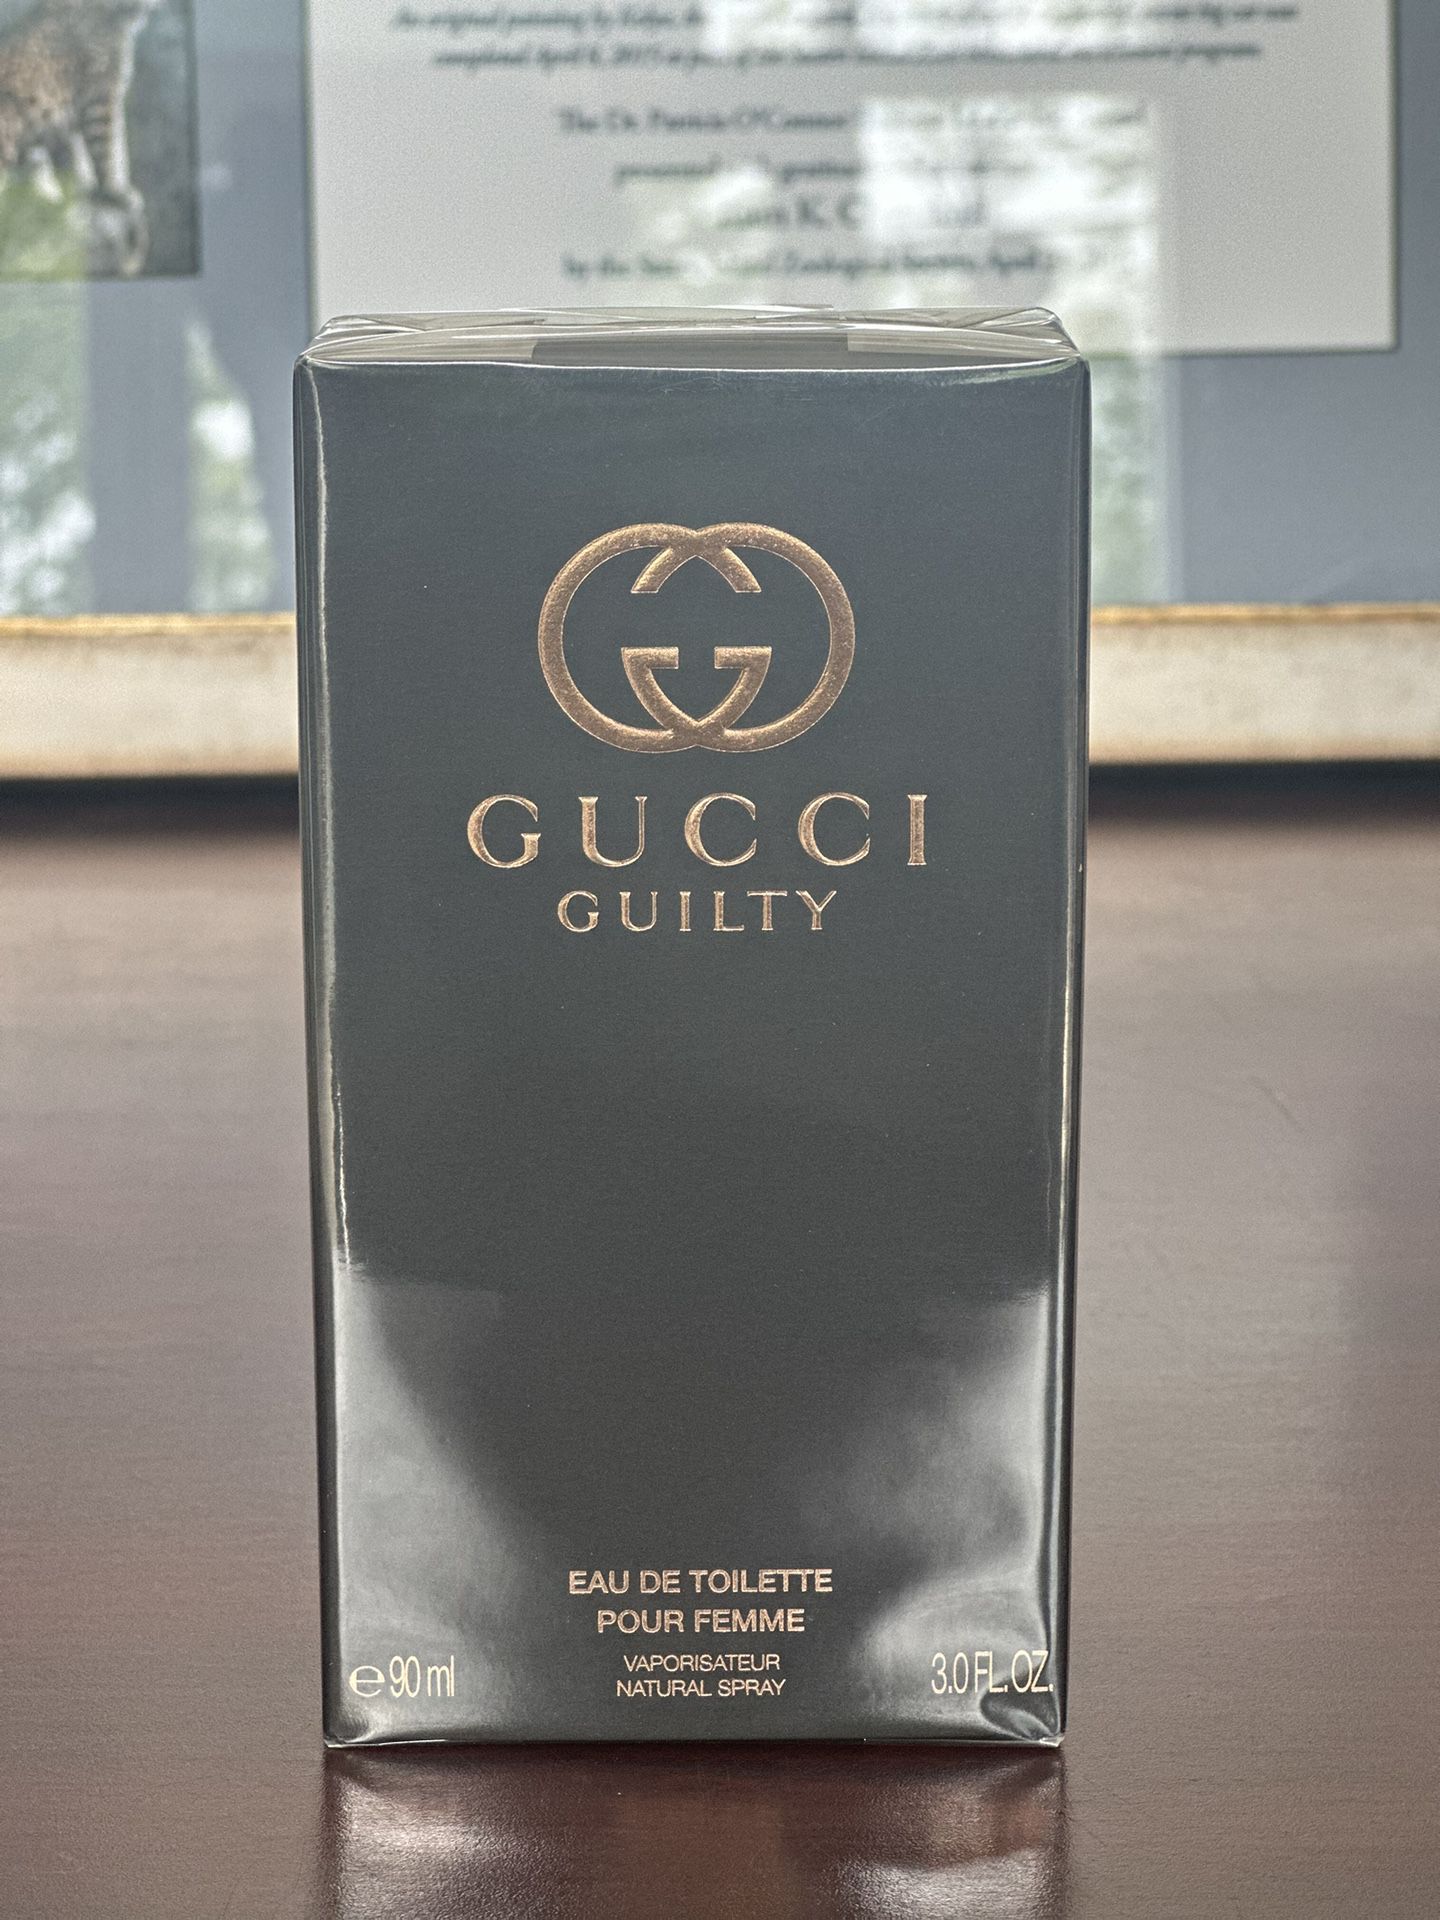 Gucci Guilty EDT for women 3oz 